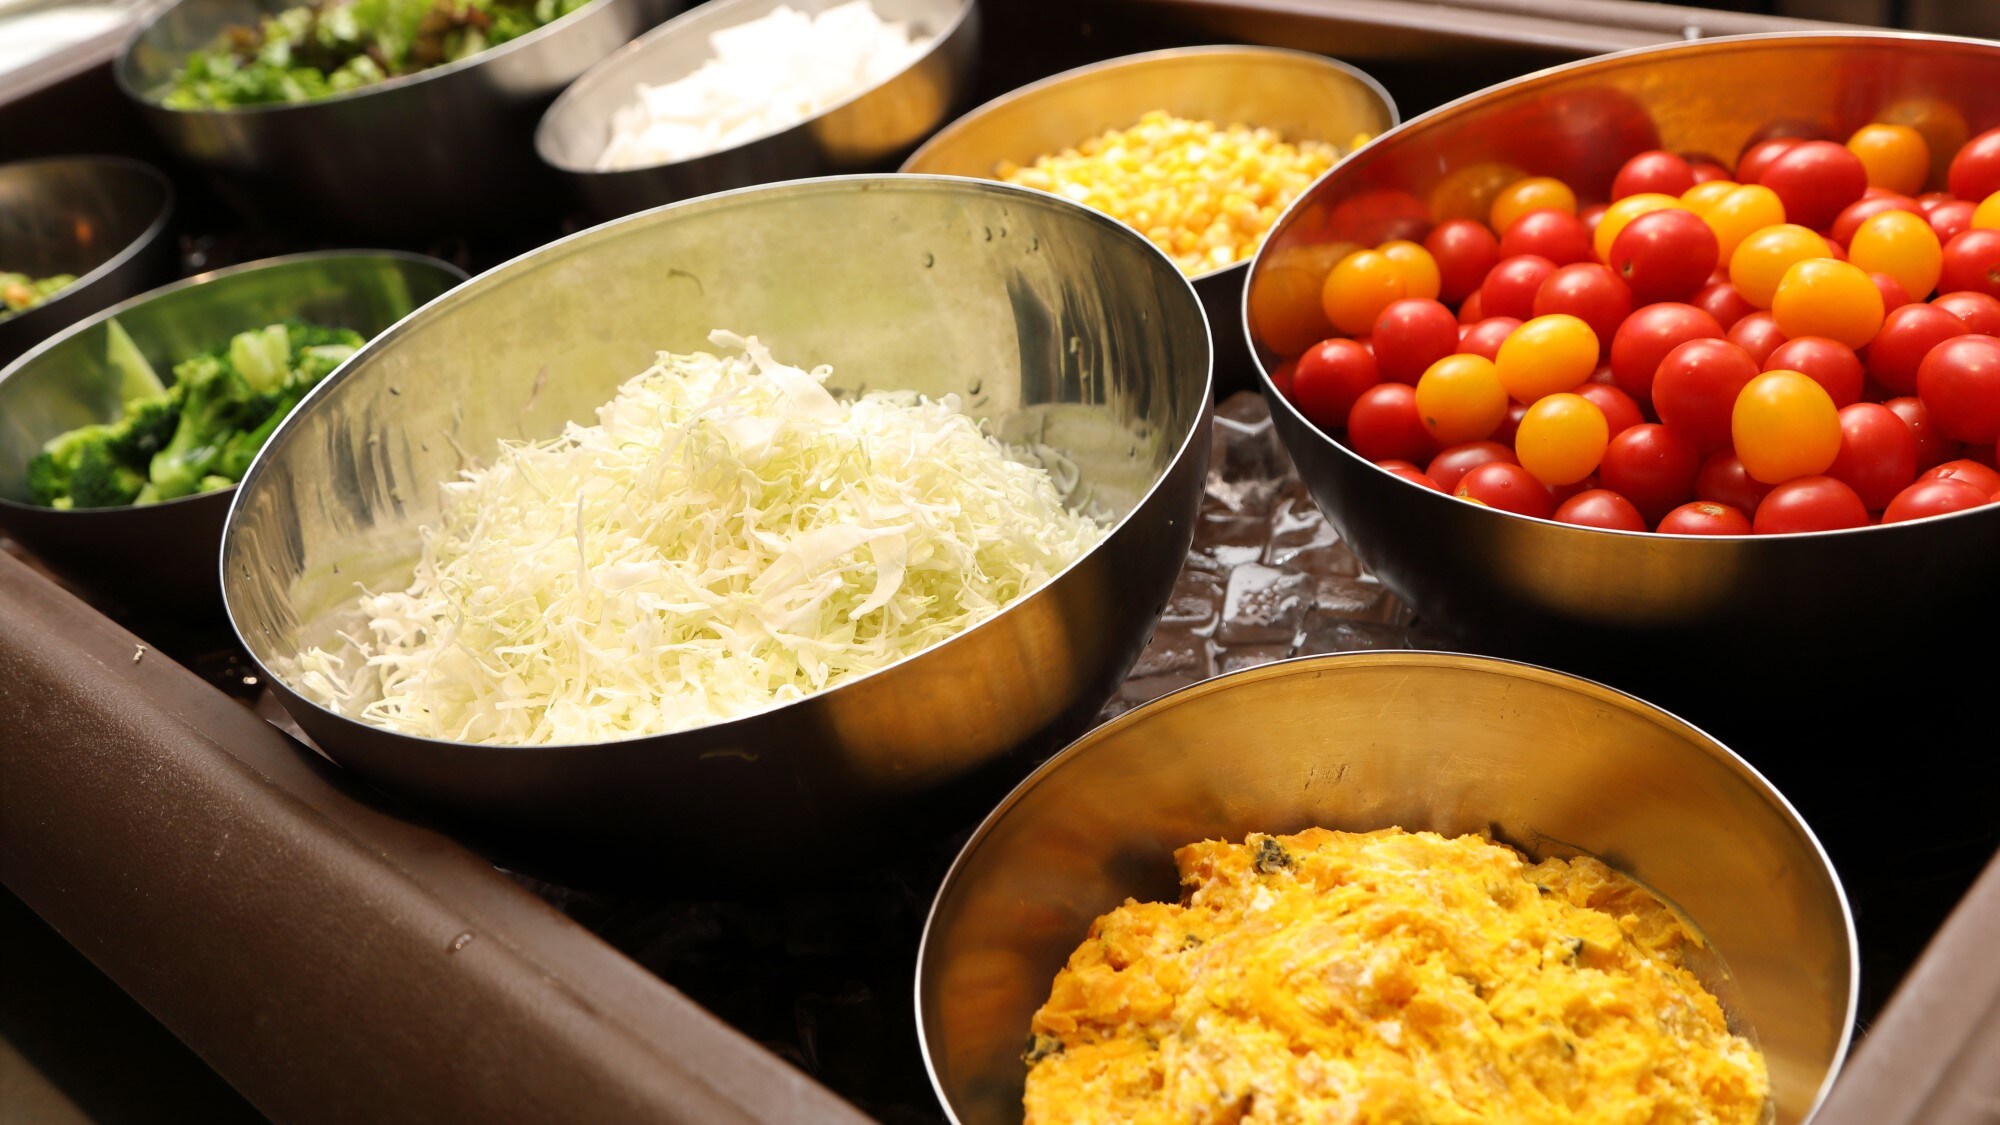 Breakfast buffet example: Colorful fresh vegetables. Make your own salad with dressings and toppings★